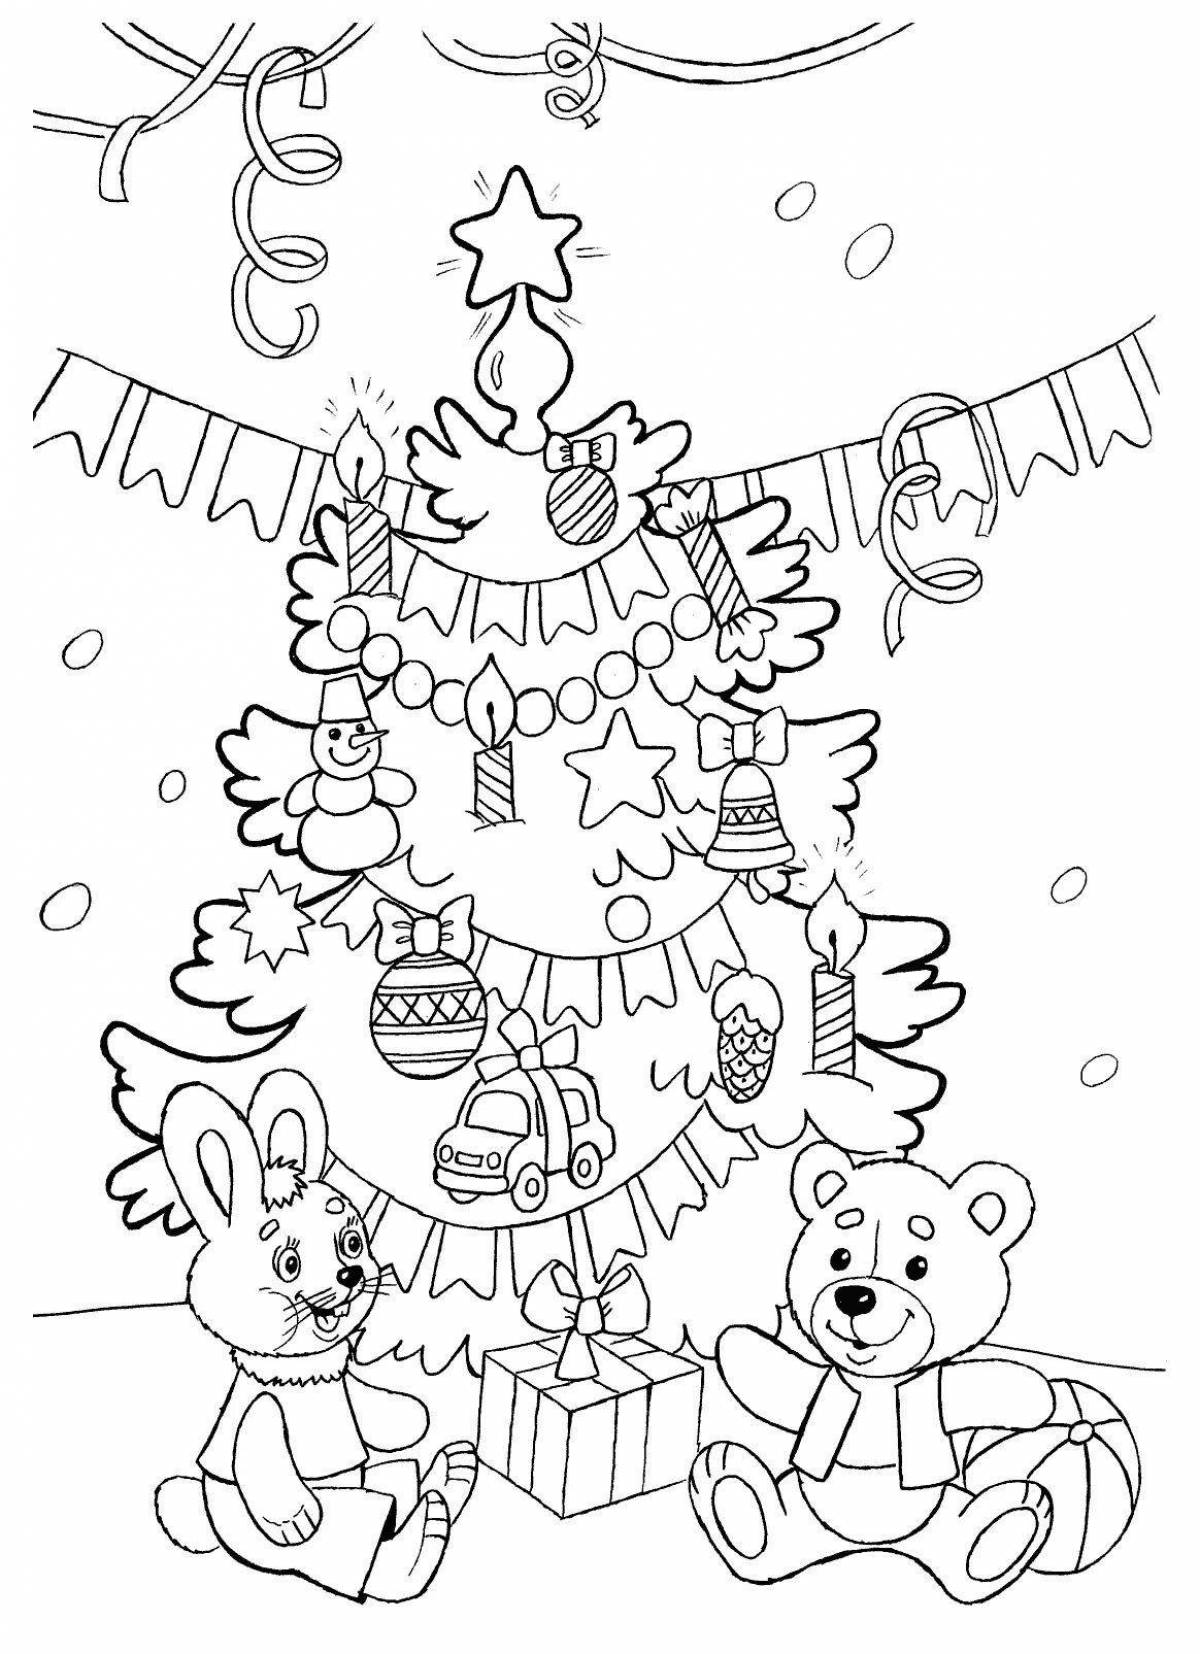 A fascinating Christmas coloring book for children aged 8-9